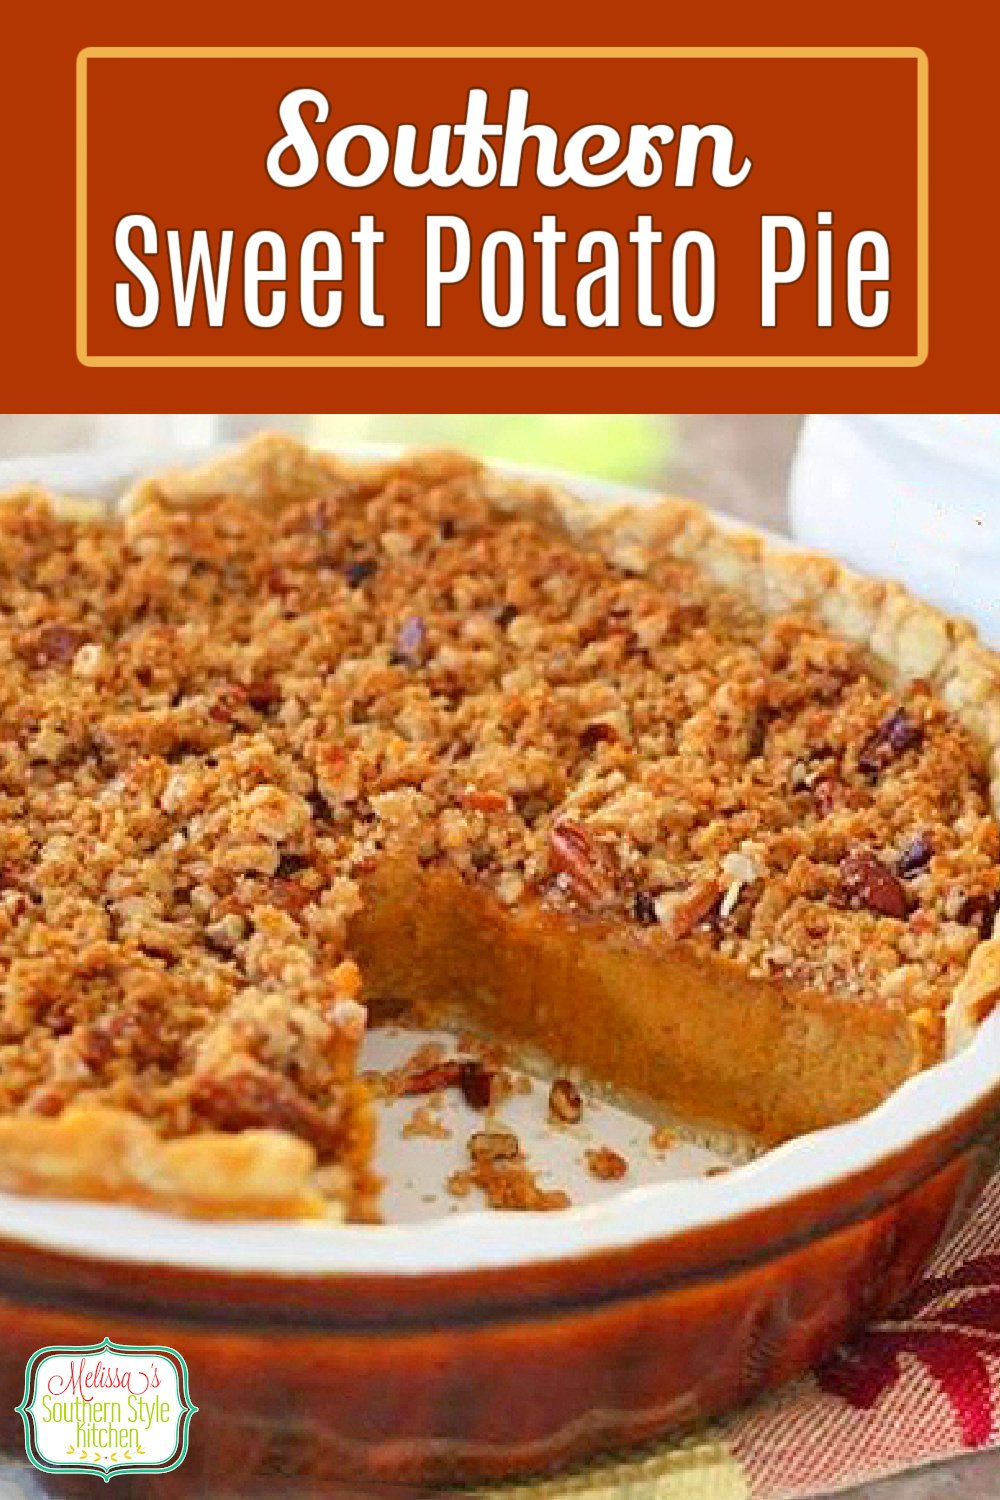 The perfect alternative to pumpkin, this streusel topped Sweet Potato Pie is impossible to resist #sweetpotatopie #sweetpotatoes #pies #pierecipes #fallbaking #thanksgivingrecipes #sweetpotato #holidayrecipes #southernfood #southernrecipes desserts #dessertfoodrecipes via @melissasssk